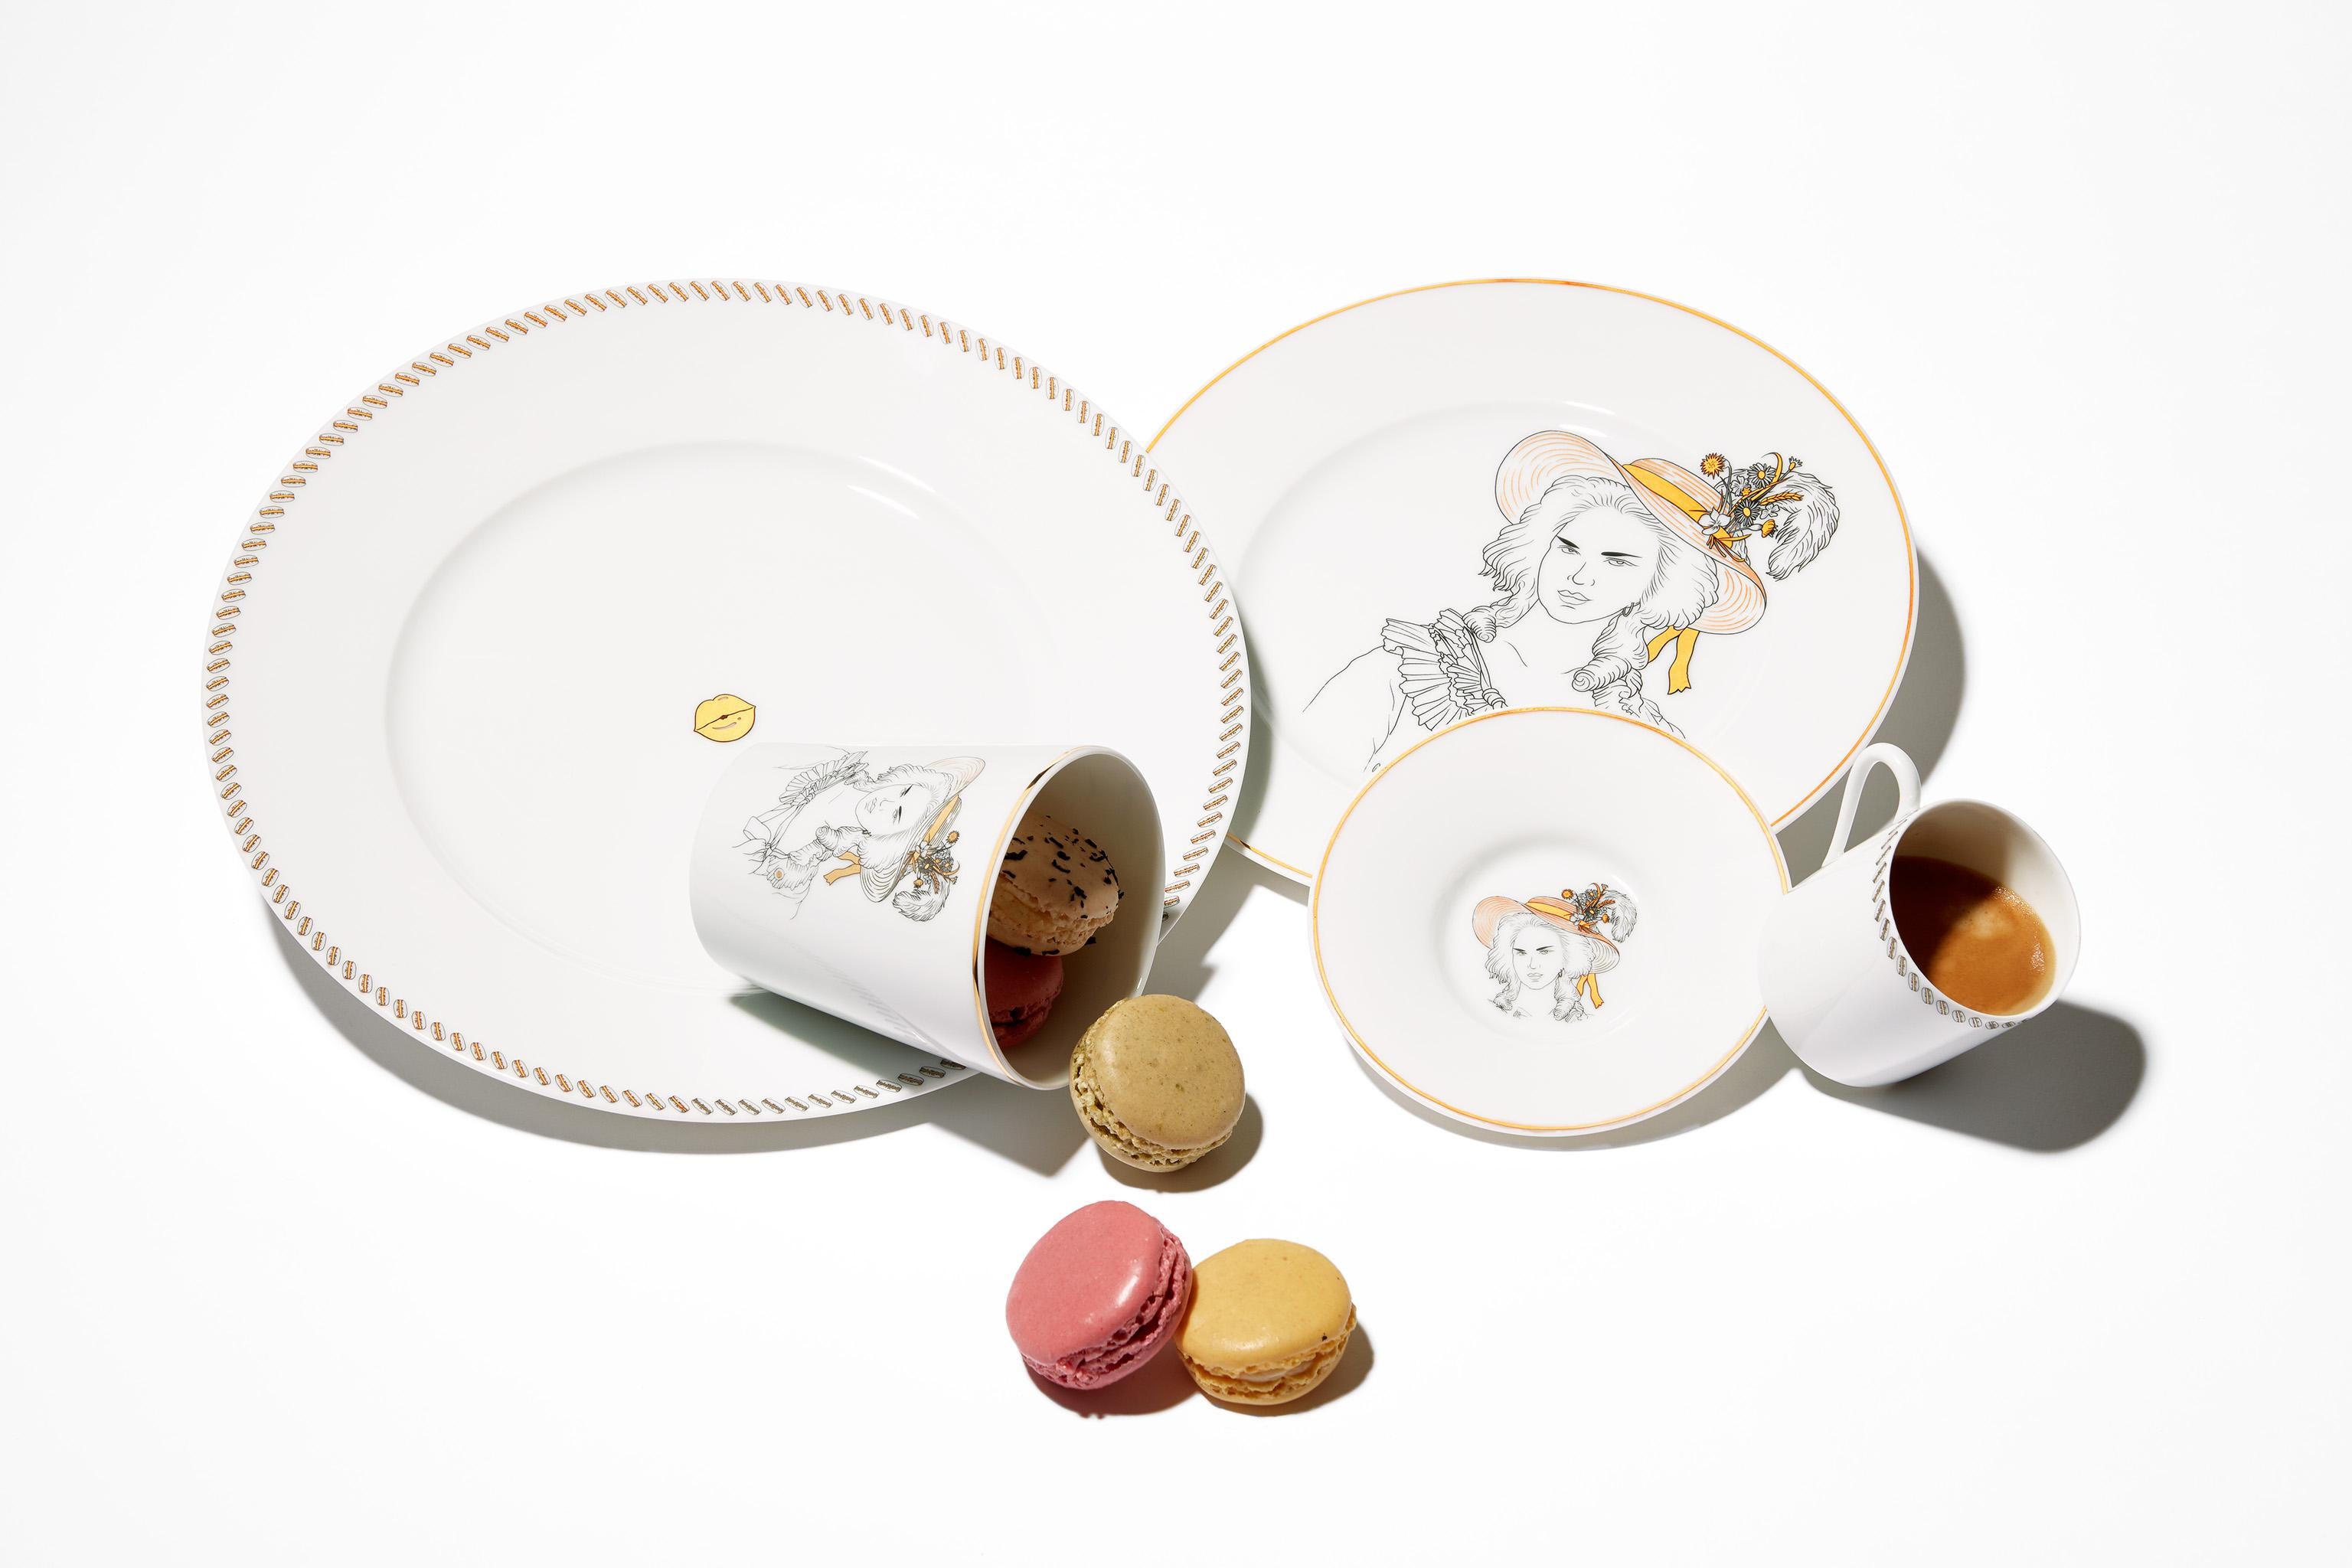 Maison Fragile and the Parisian illustrator artist Jean-Michel Tixier have joined together to create a collection that pays tribute to these men and women, key figures of history, who have made Paris as we know it.

Porcelaine of Limoges extra